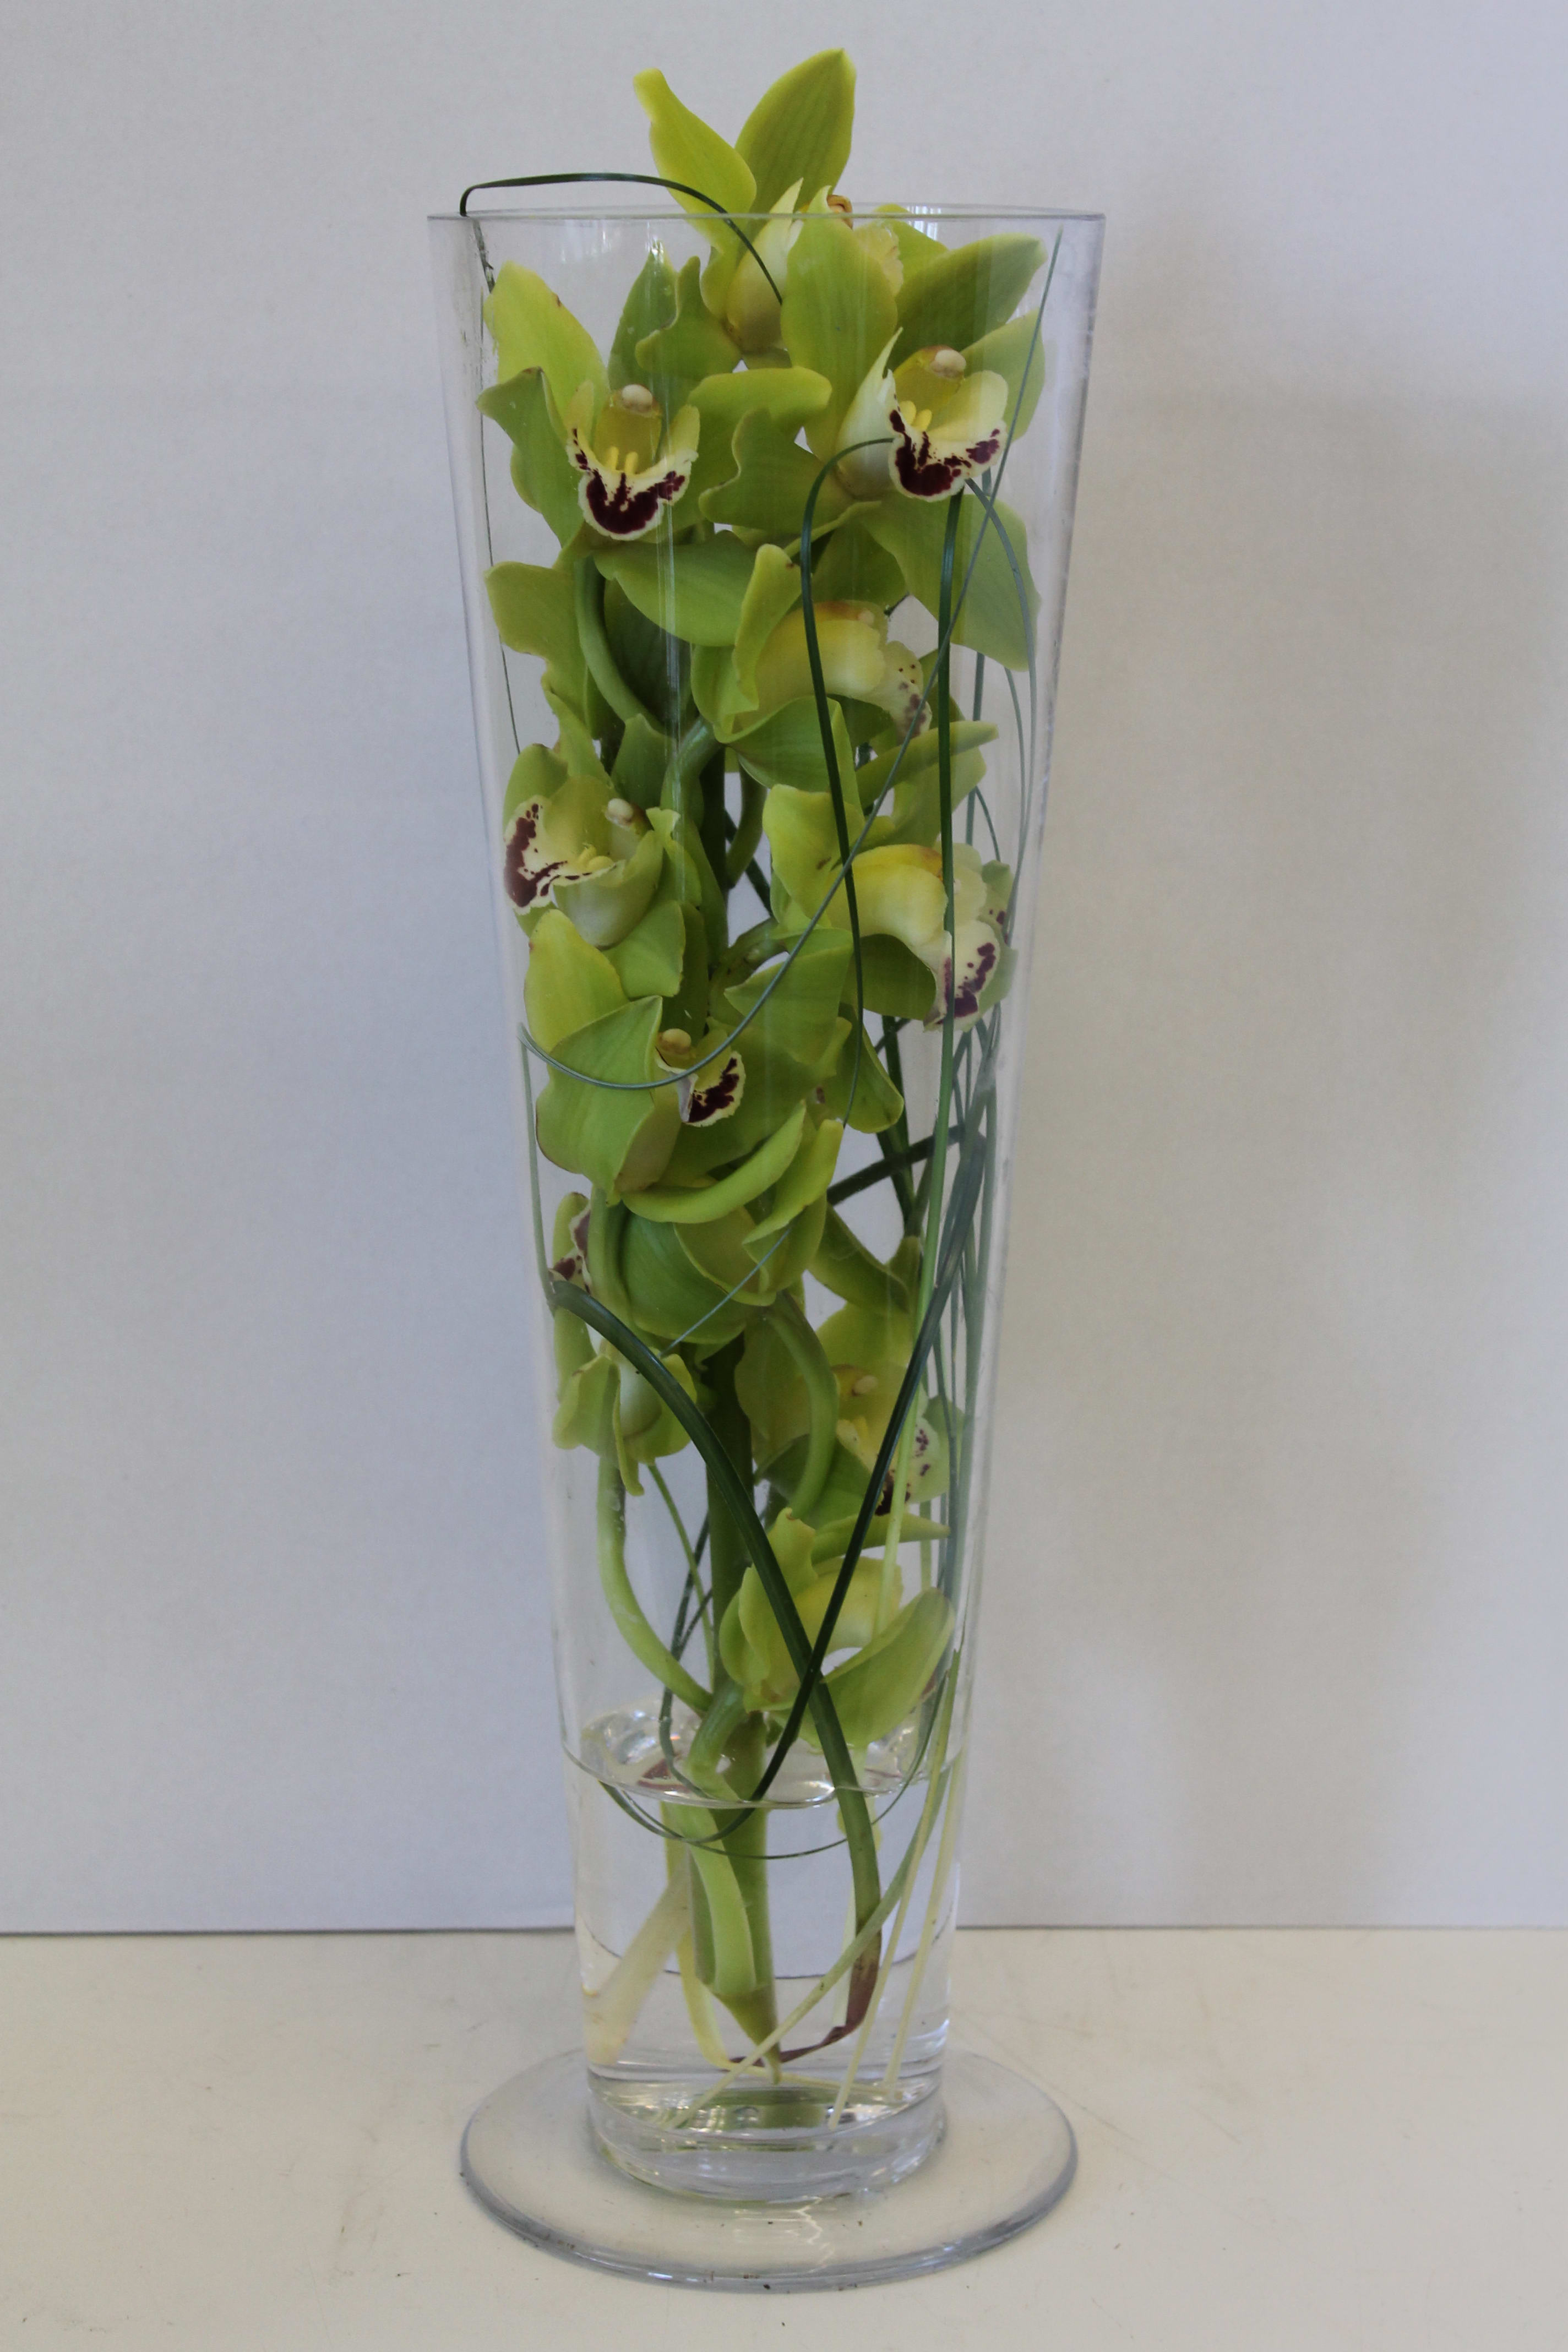 Modern Orchids - For a true work of art, choose this gift that is pure elegance in its simplicity. One fabulous stem of Cymbidium orchids is presented in a tall, clear glass vase.